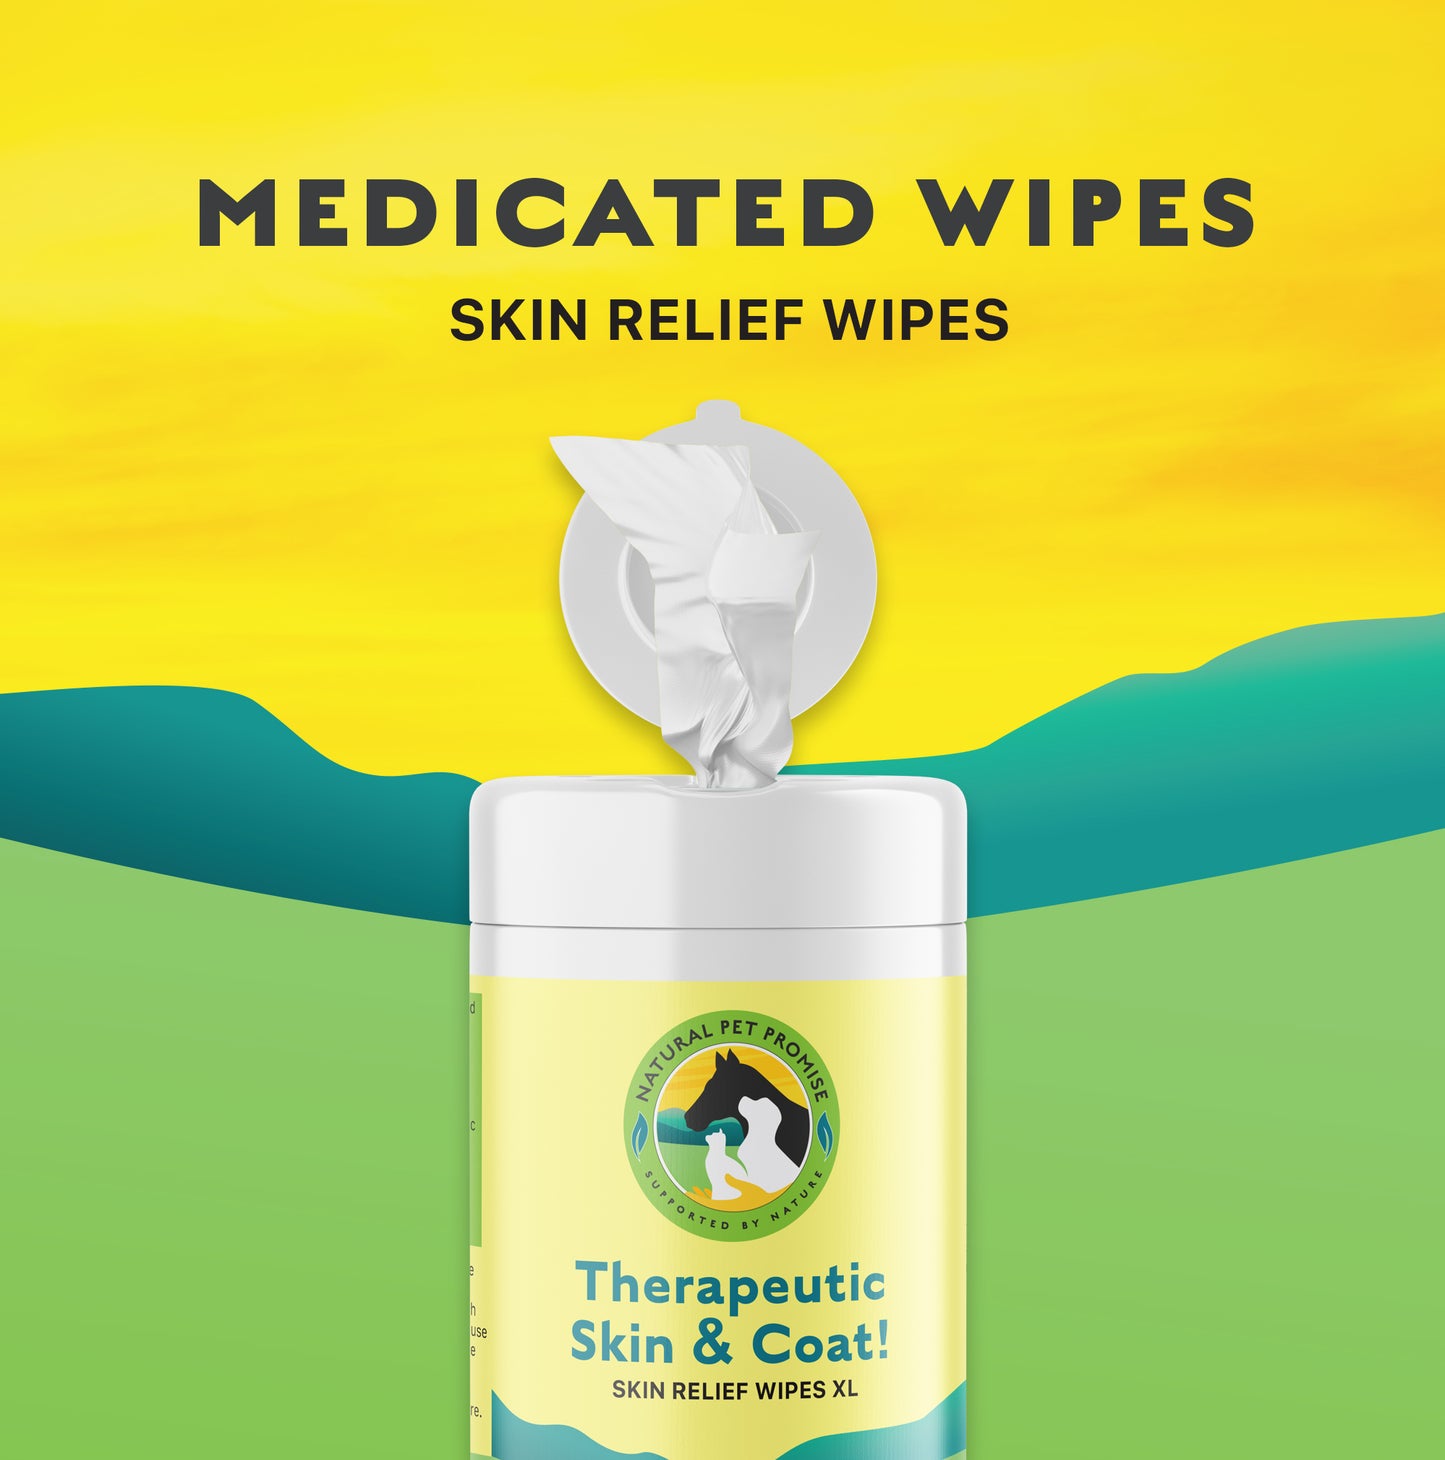 ALLERGY/SKIN/WIPE- Therapeutic Skin and Coat! Skin Relief Wipes XL